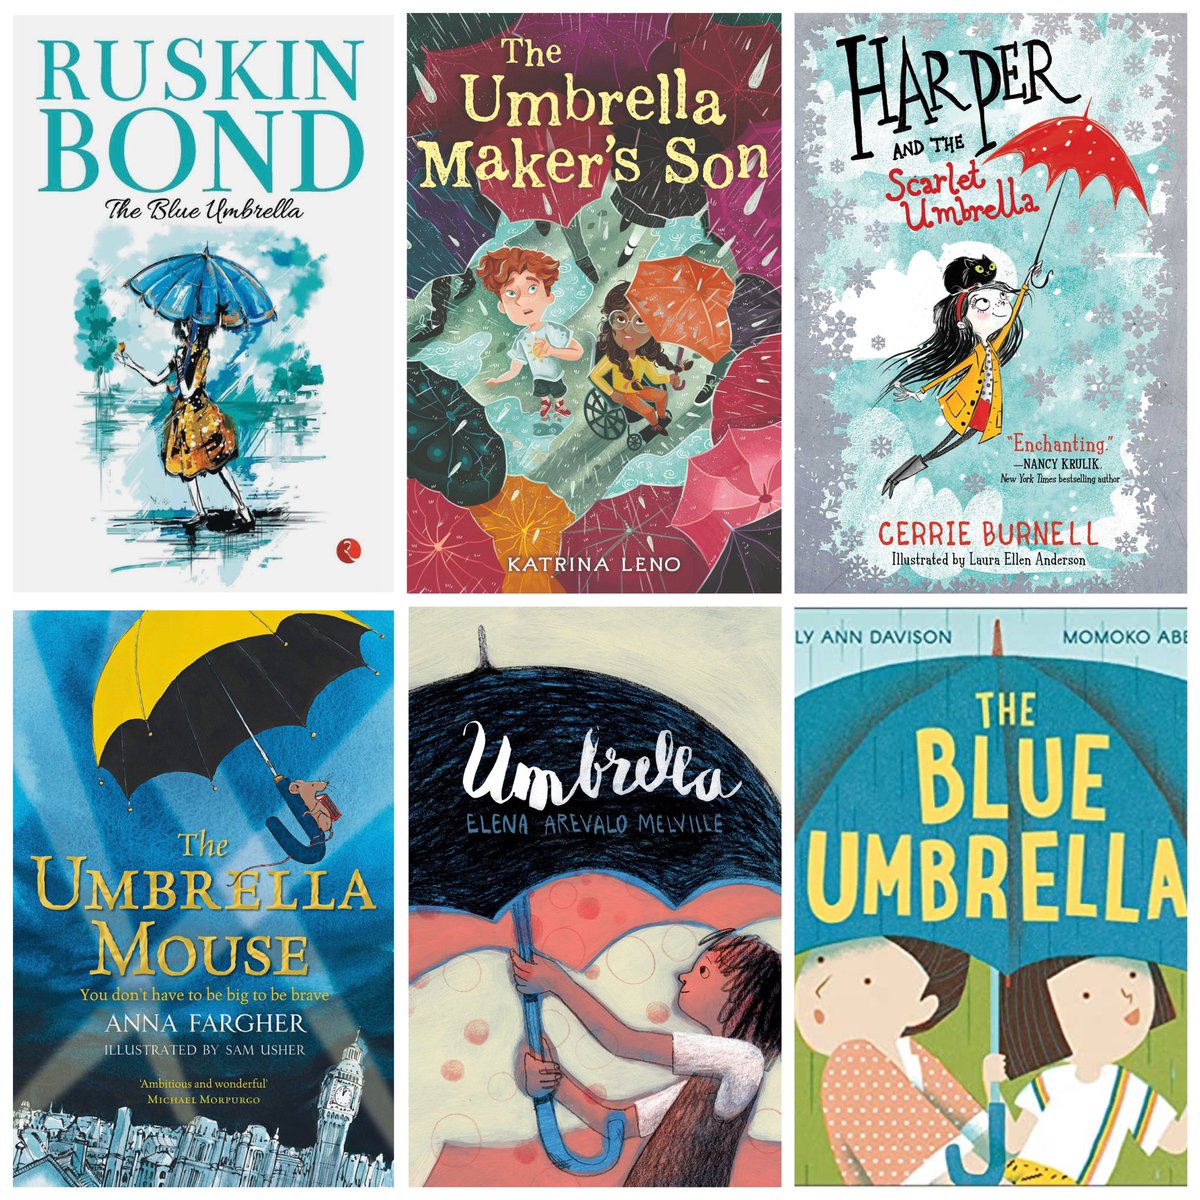 As today is #NationalUmbrellaDay, how about finding the time to read a fabulous #Umbrella book 📚📚☂️
@Lillustrator @sketch_booking @emilyanndavison 
#BookTwitter #UmbrellaDay